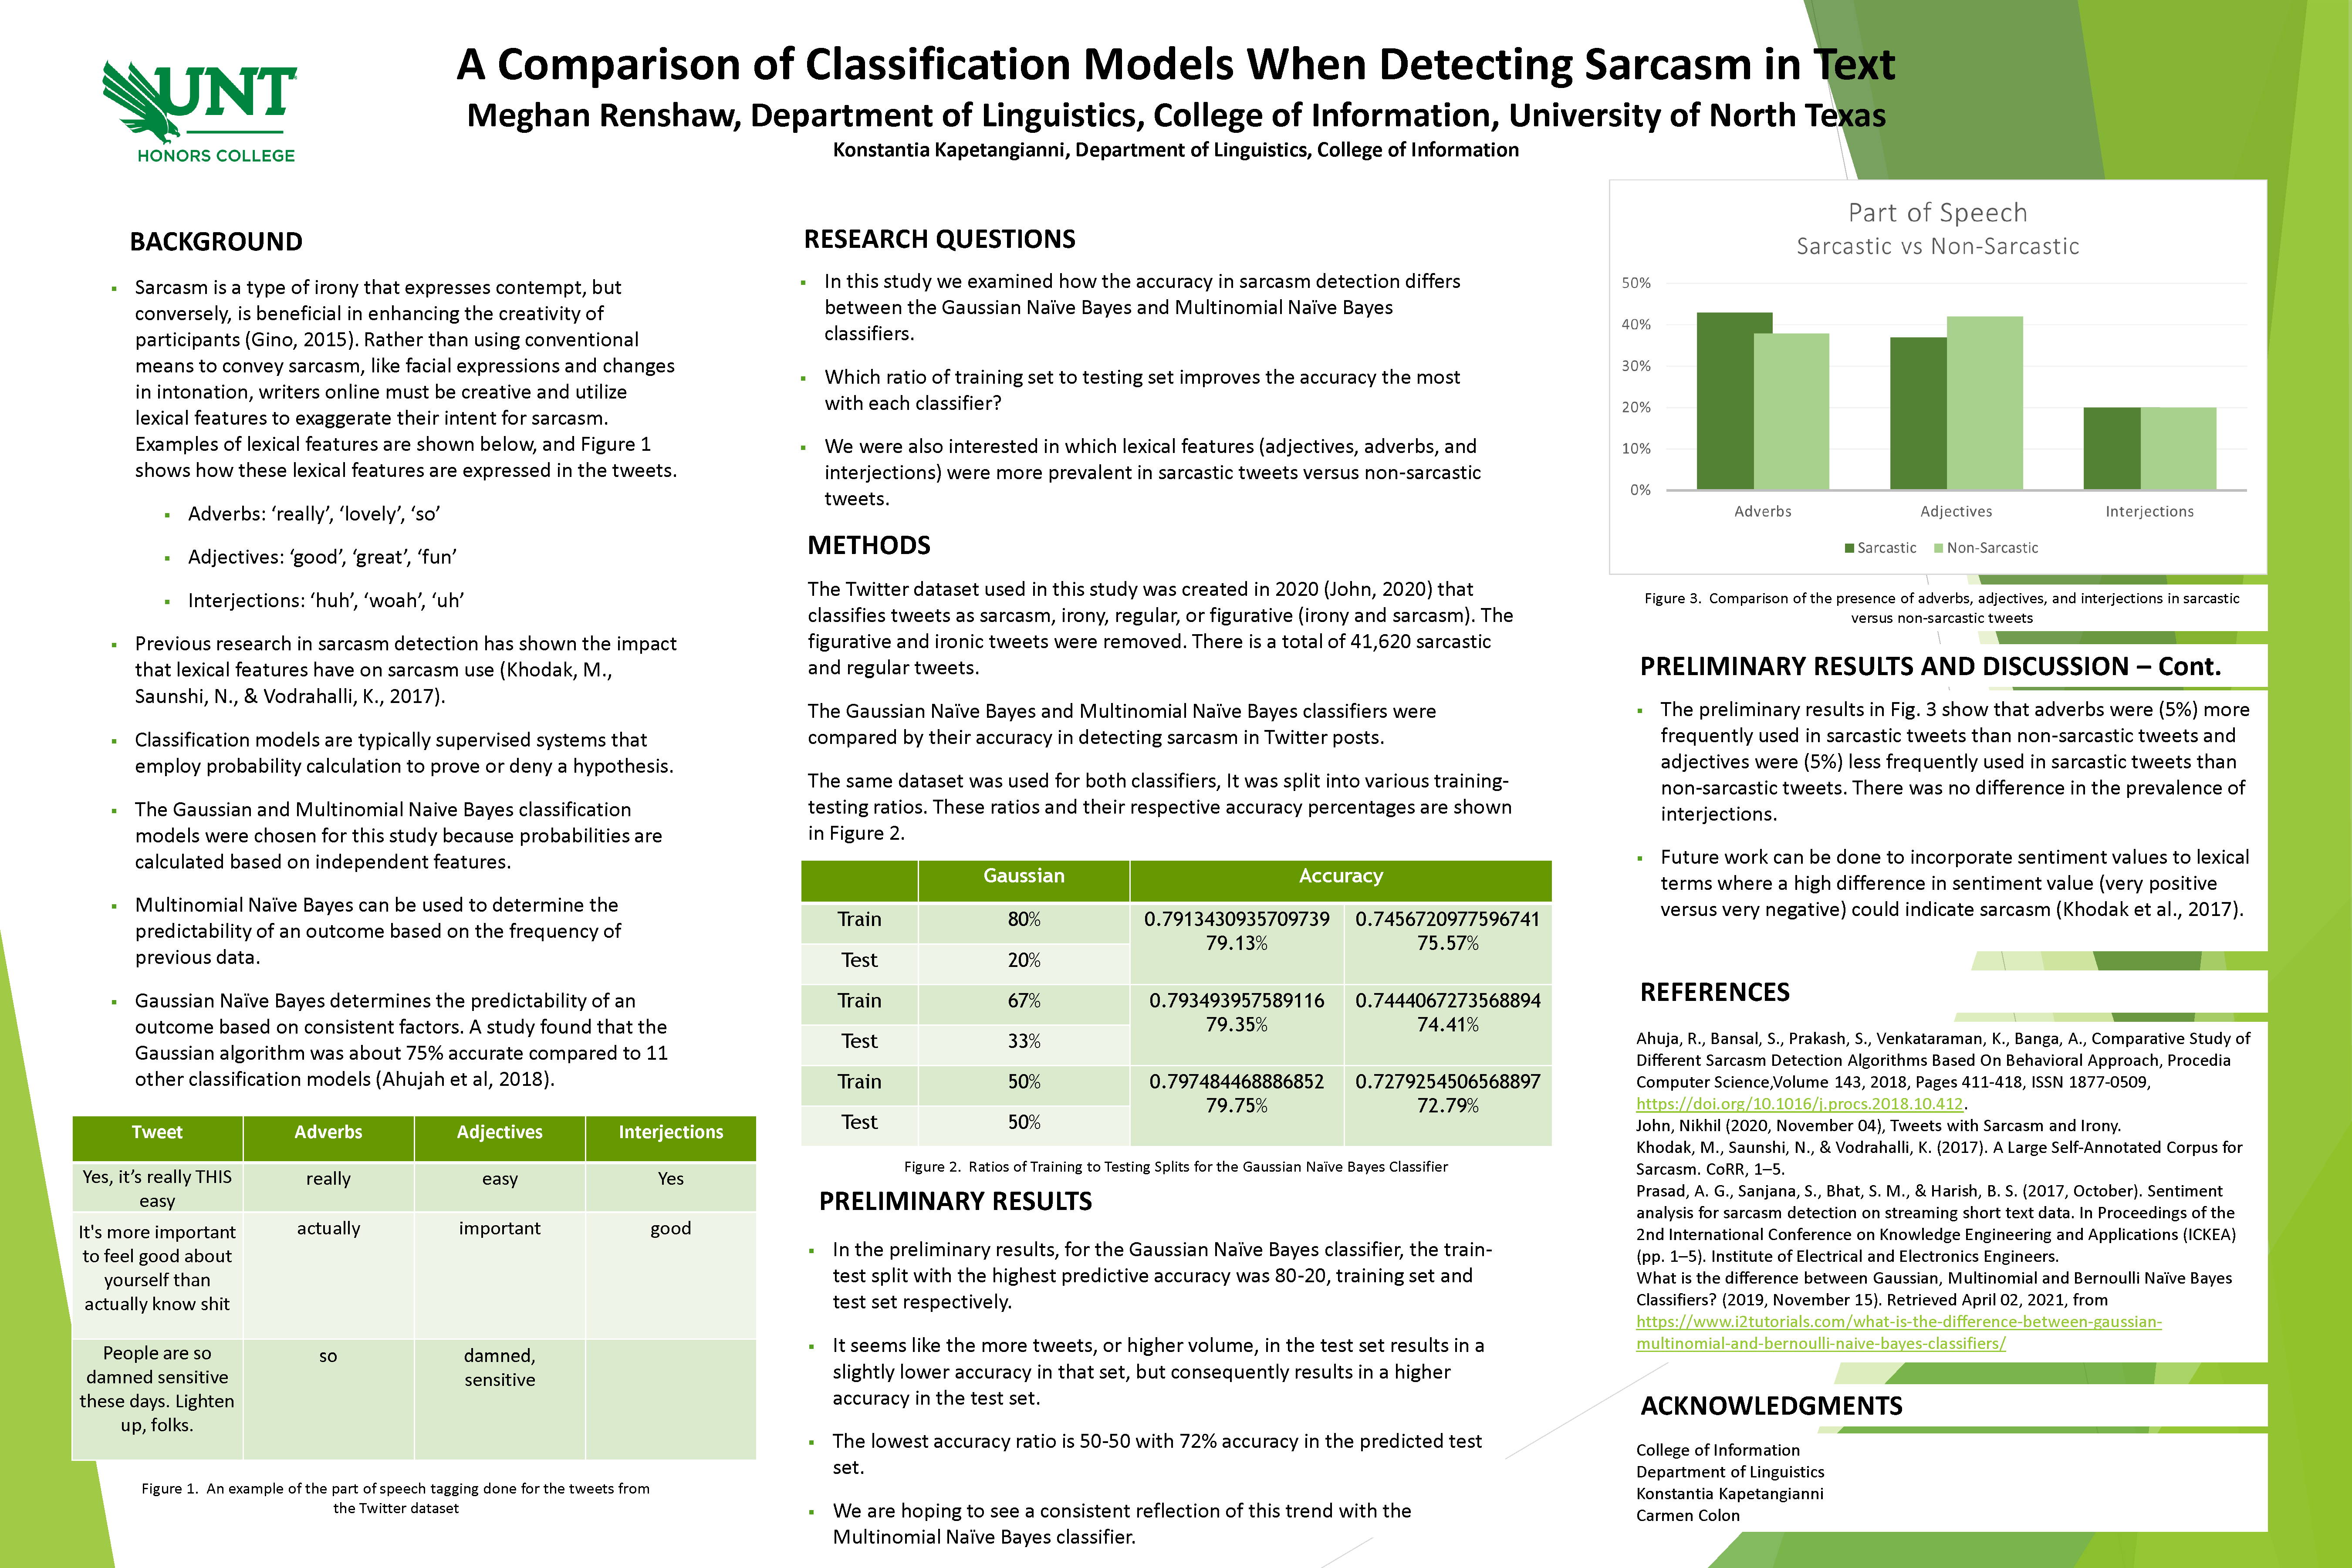 A Comparison of Classification Models When Detecting Sarcasm in Text